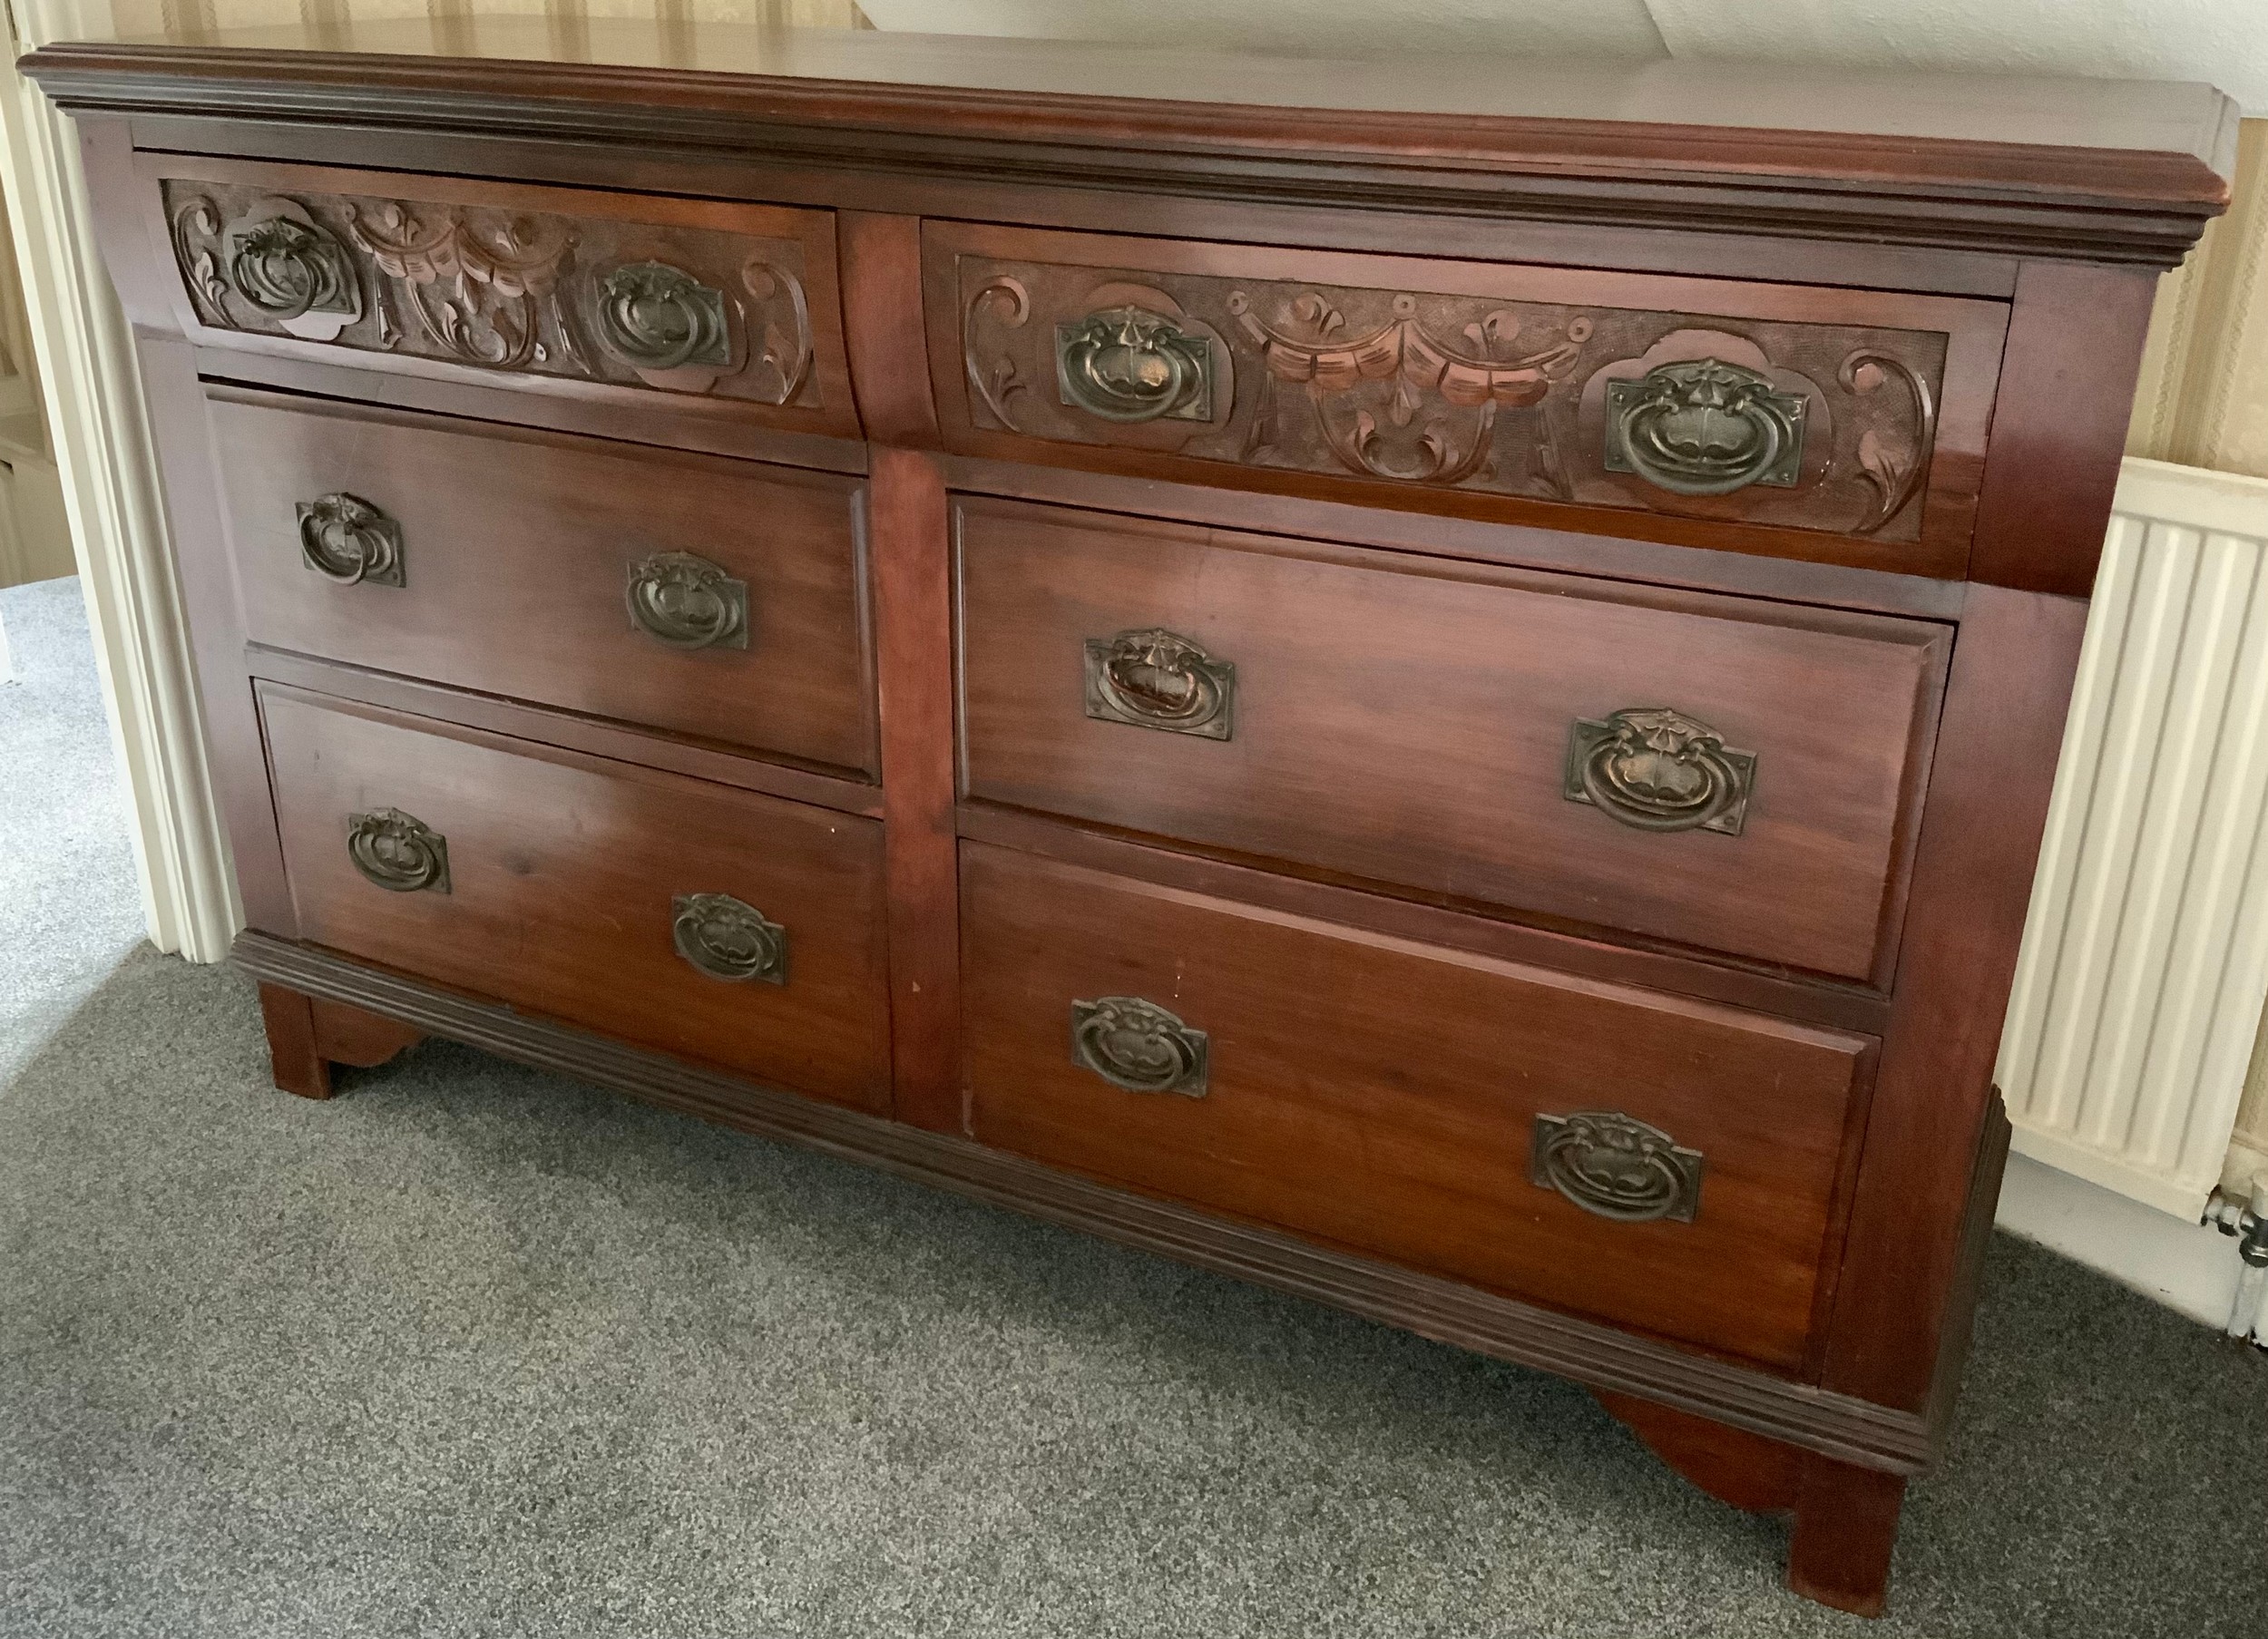 An early 20th century mahogany sidebaord, with six drawers, carved with swags, Art Nouveau - Image 2 of 2